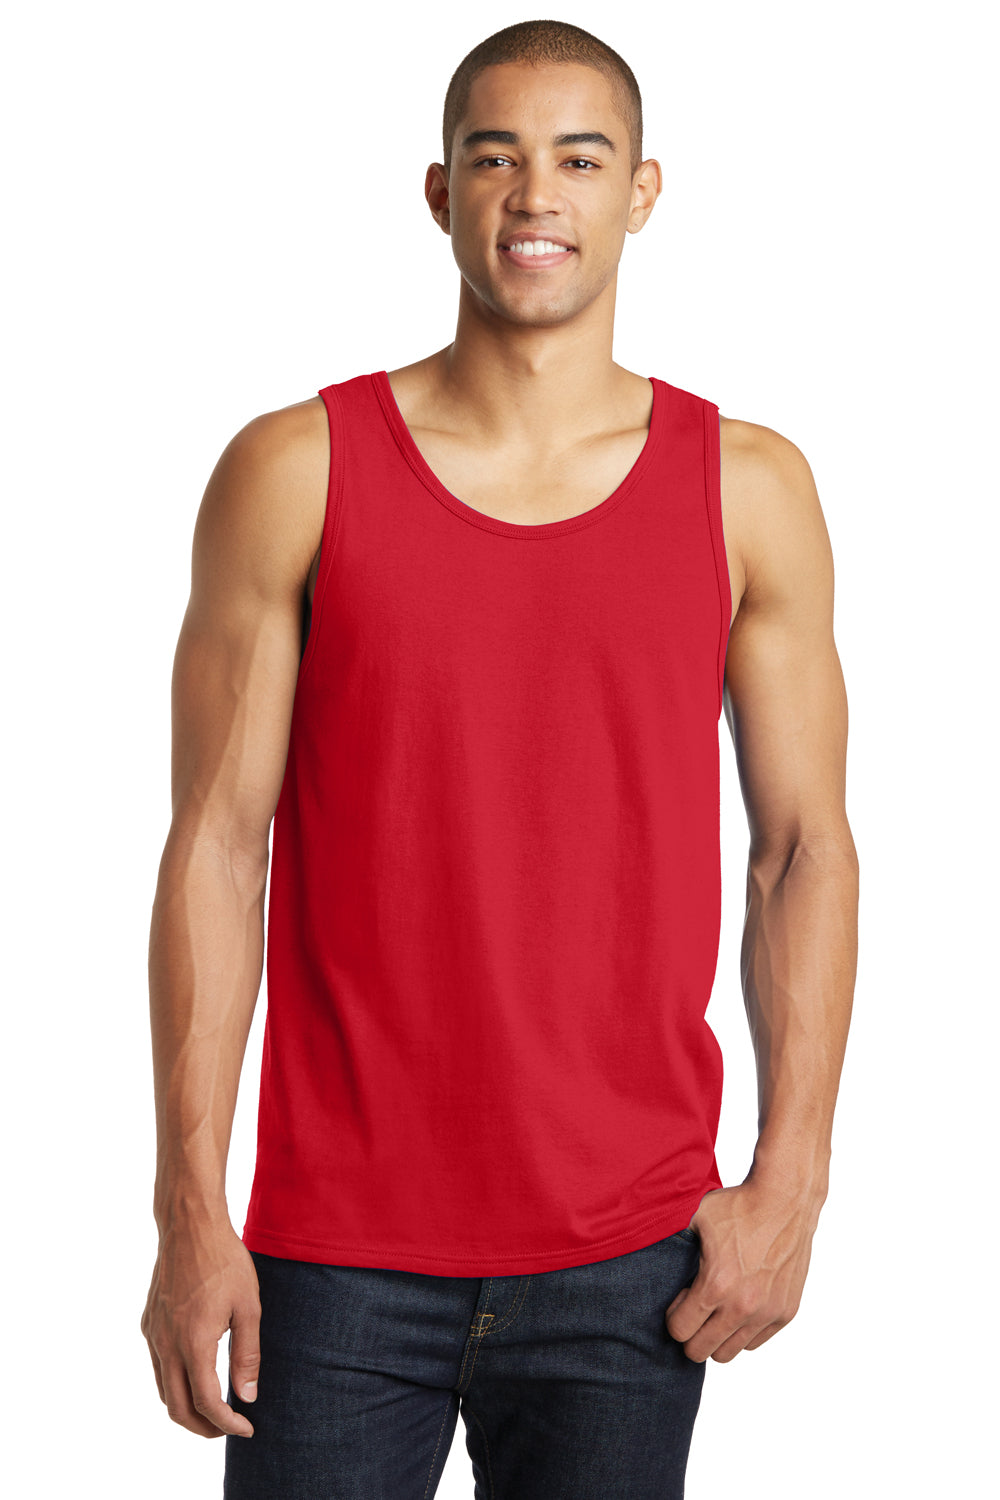 District DT5300 Mens The Concert Tank Top Red Front